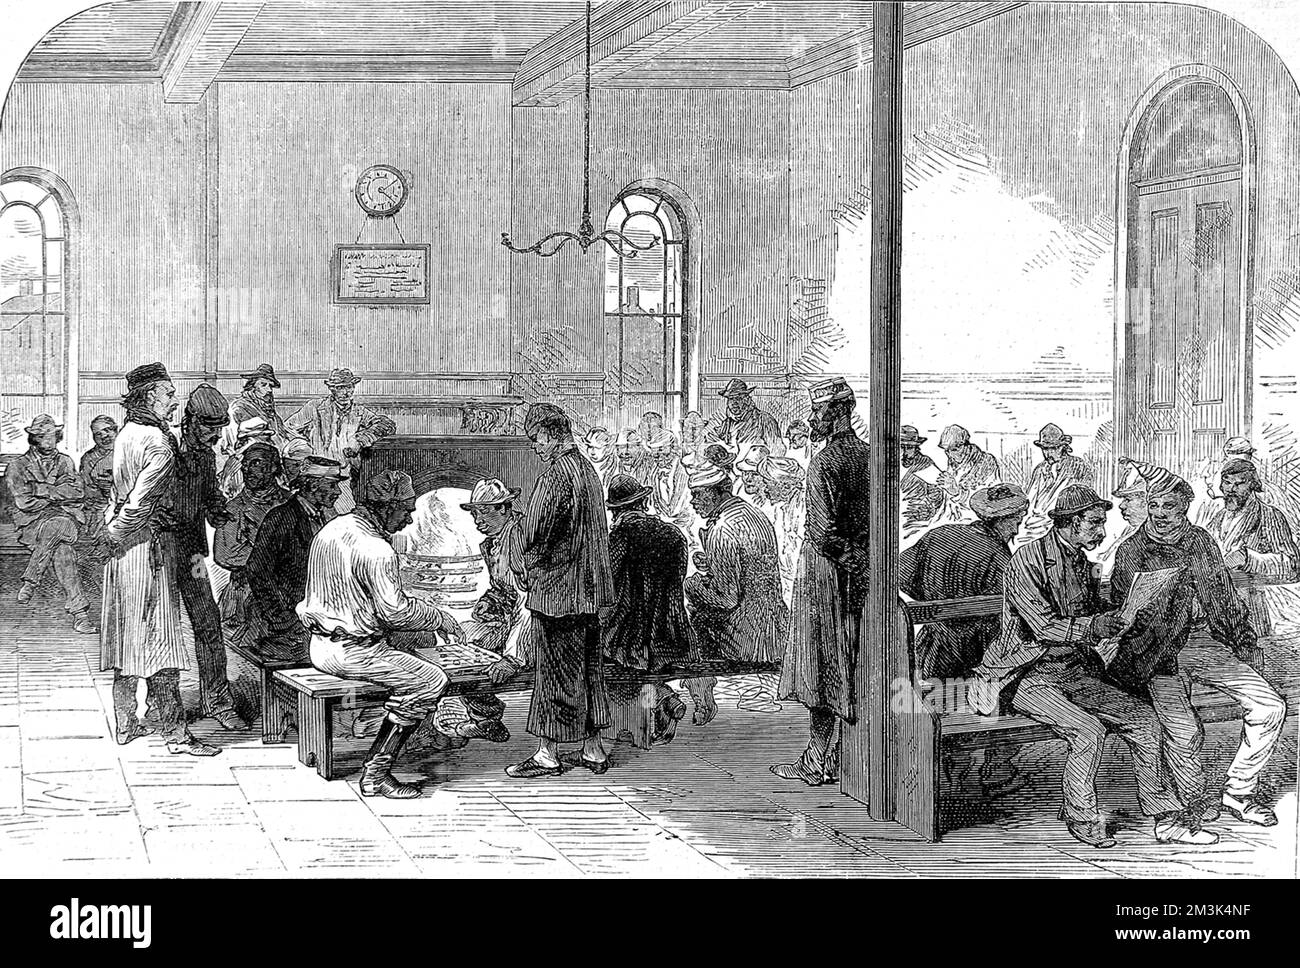 The interior of one of the rooms of the 'Strangers Home for Asiatics, Africans and South Sea Islanders' in West India Dock Road, Limehouse, London.  This home offered accommodation to the foreign sailors and servants arriving at the London Docks in their thousands every year, at that time.     Date: 1870 Stock Photo